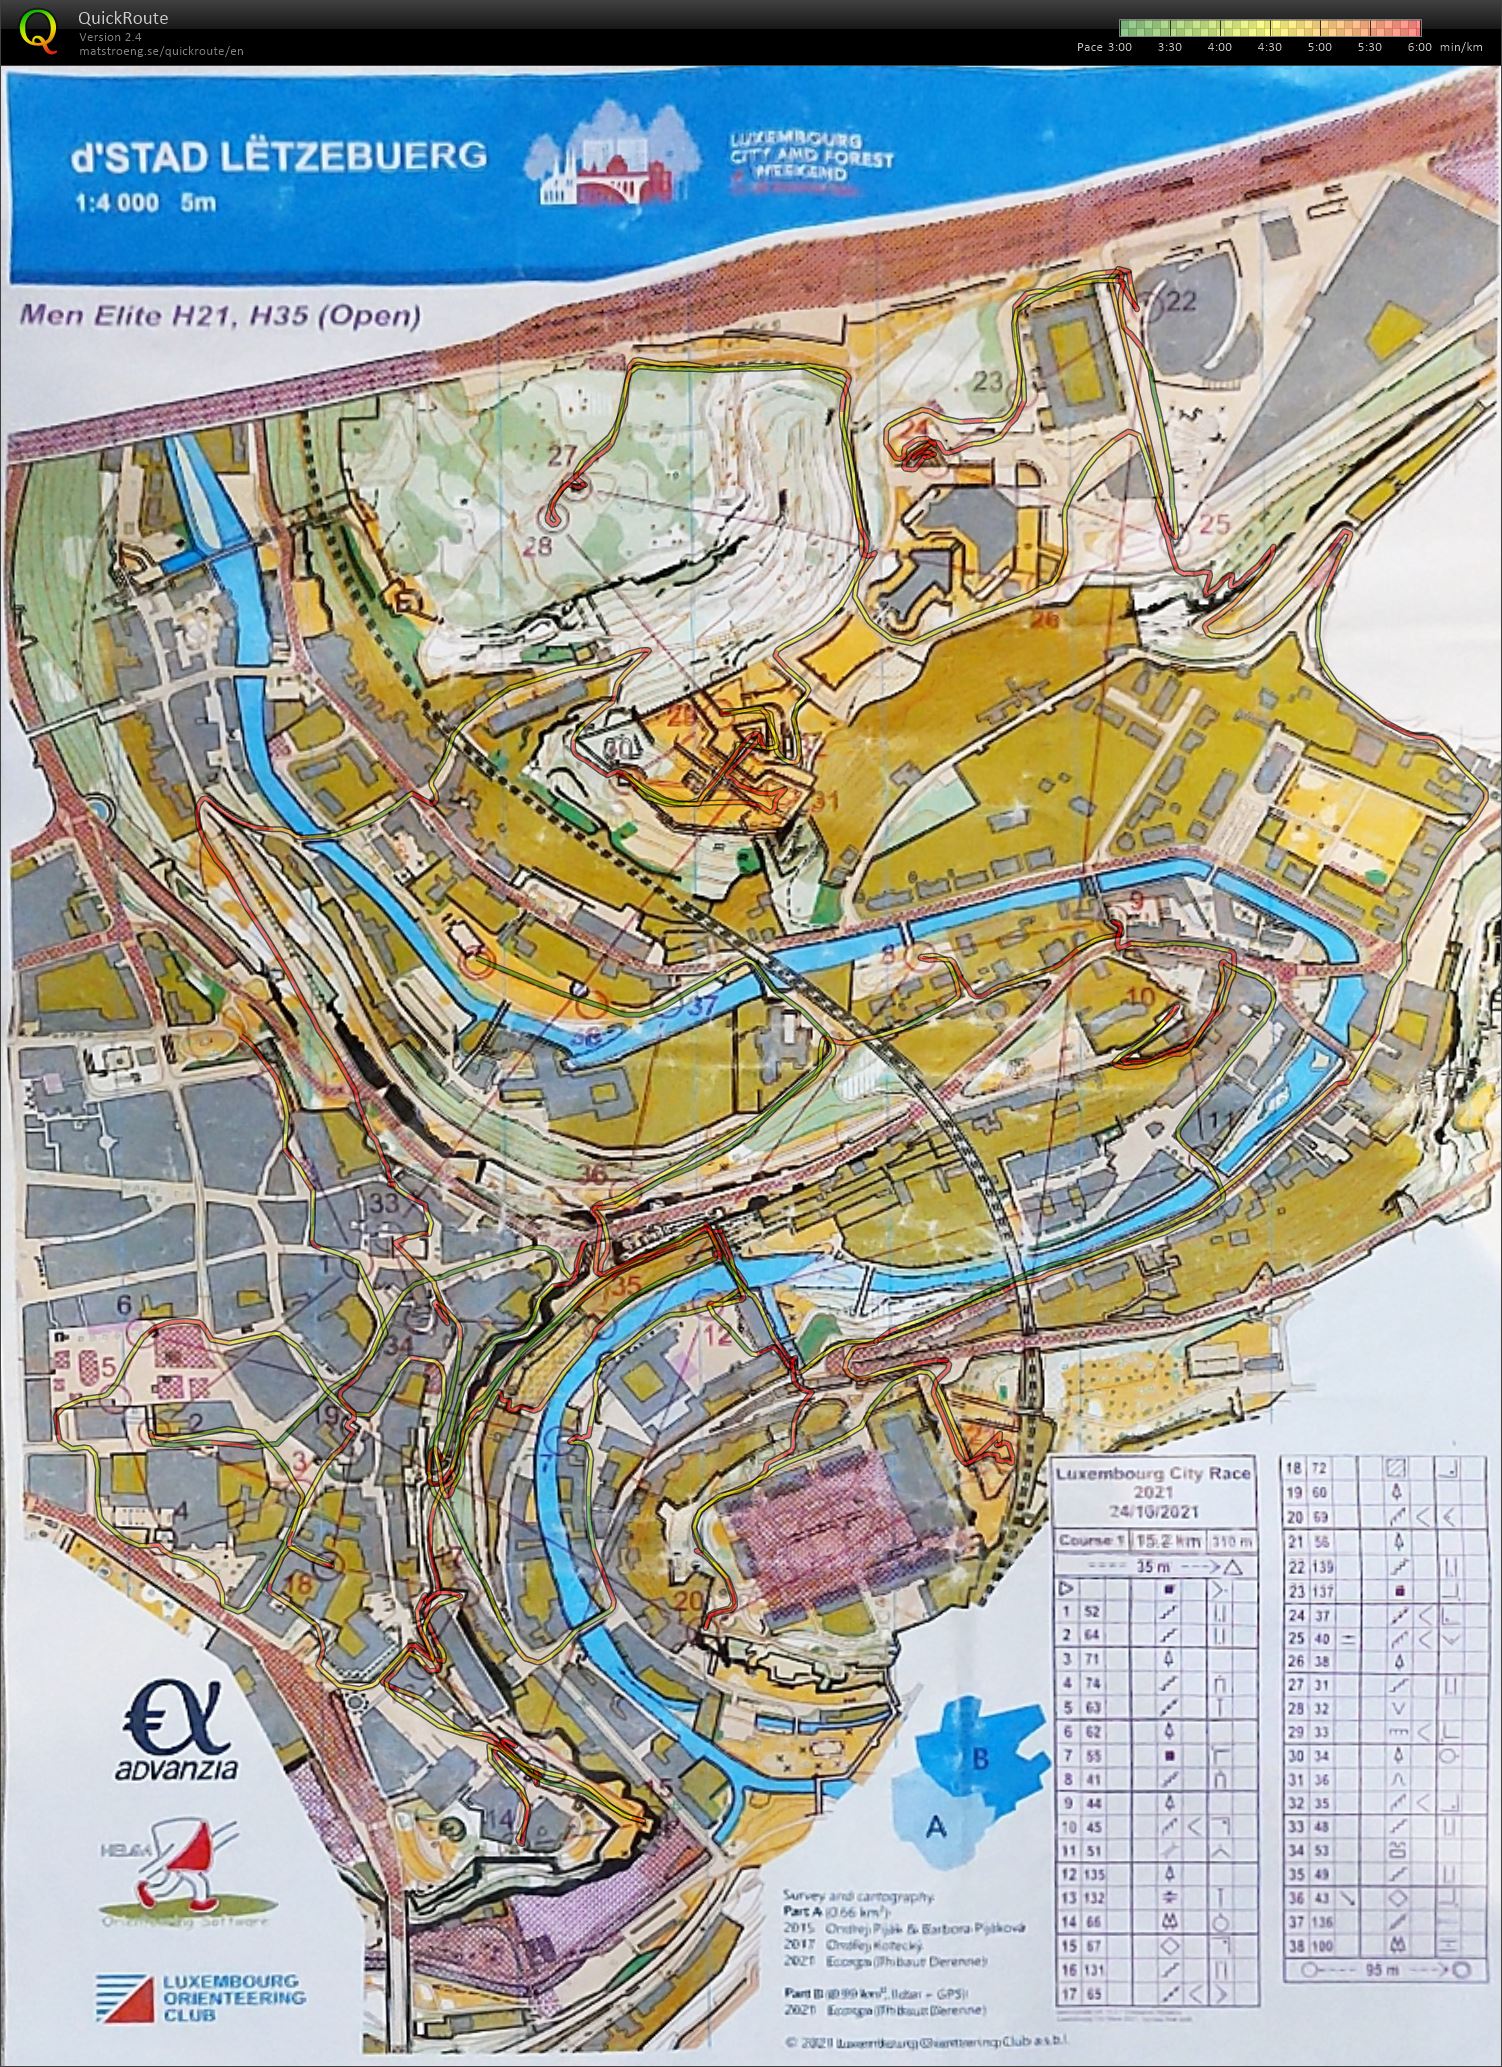 Luxembourg City Race (24/10/2021)